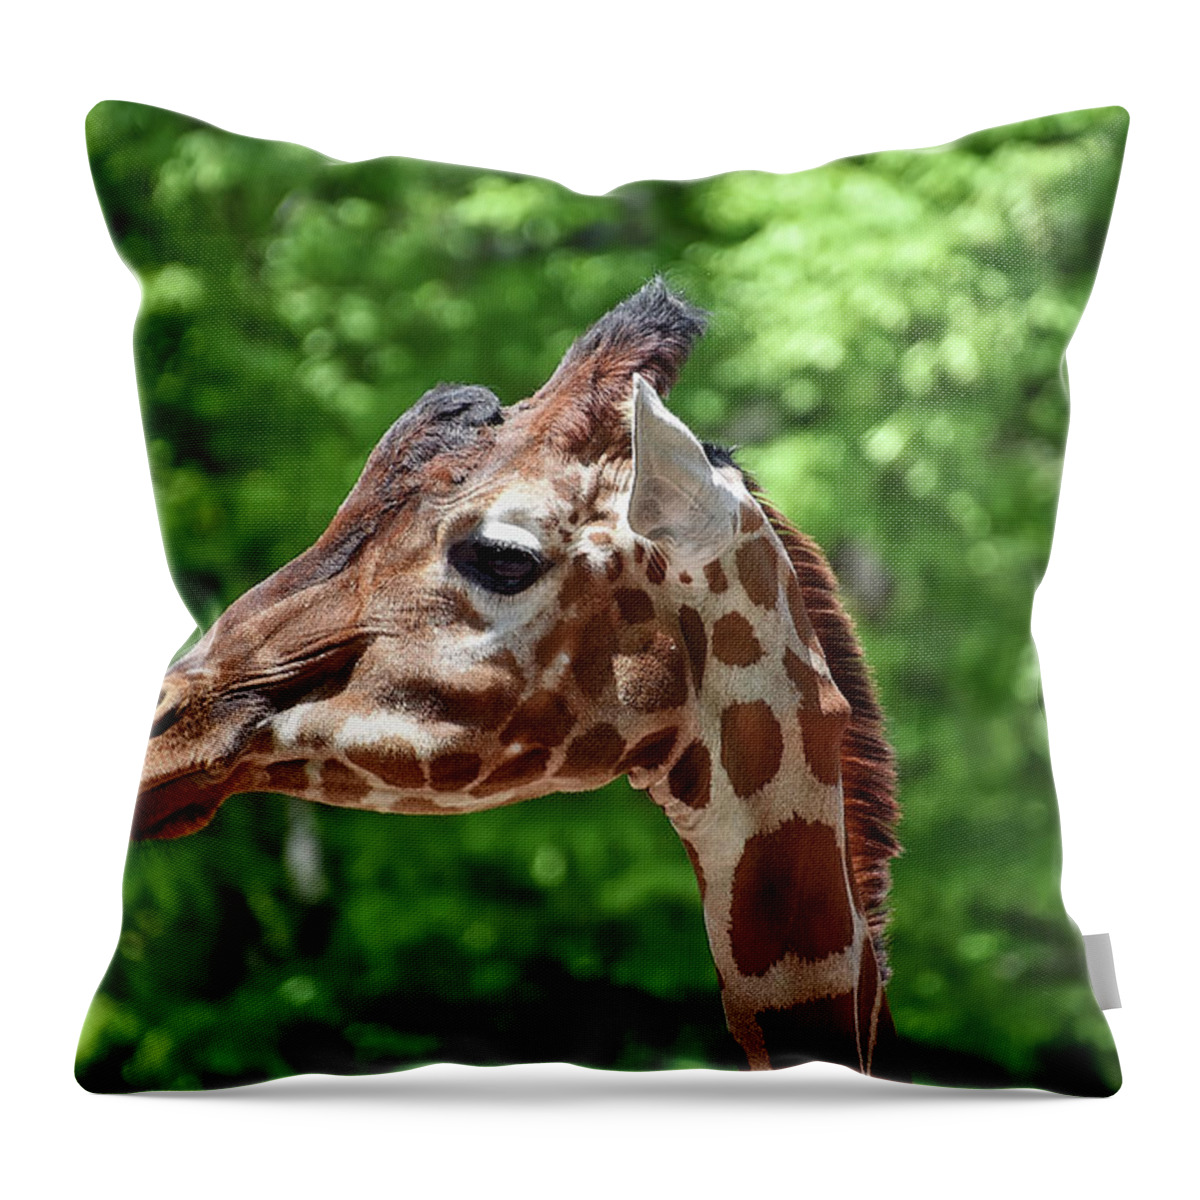 Giraffe Throw Pillow featuring the photograph The Big Guy by Kuni Photography